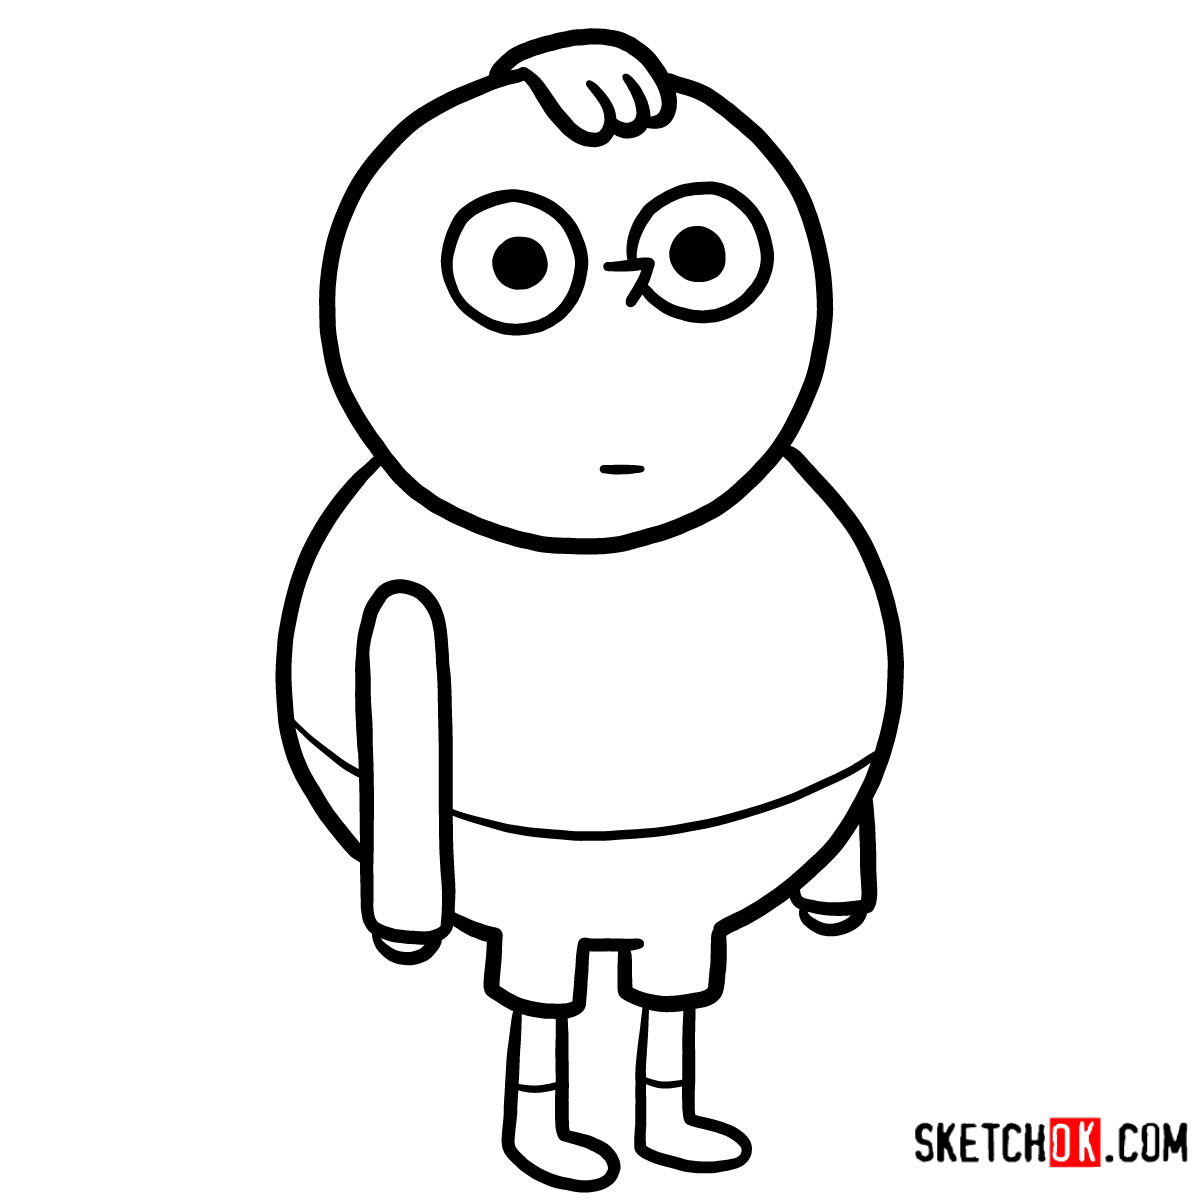 How to draw Clarence characters - Sketchok easy drawing guid